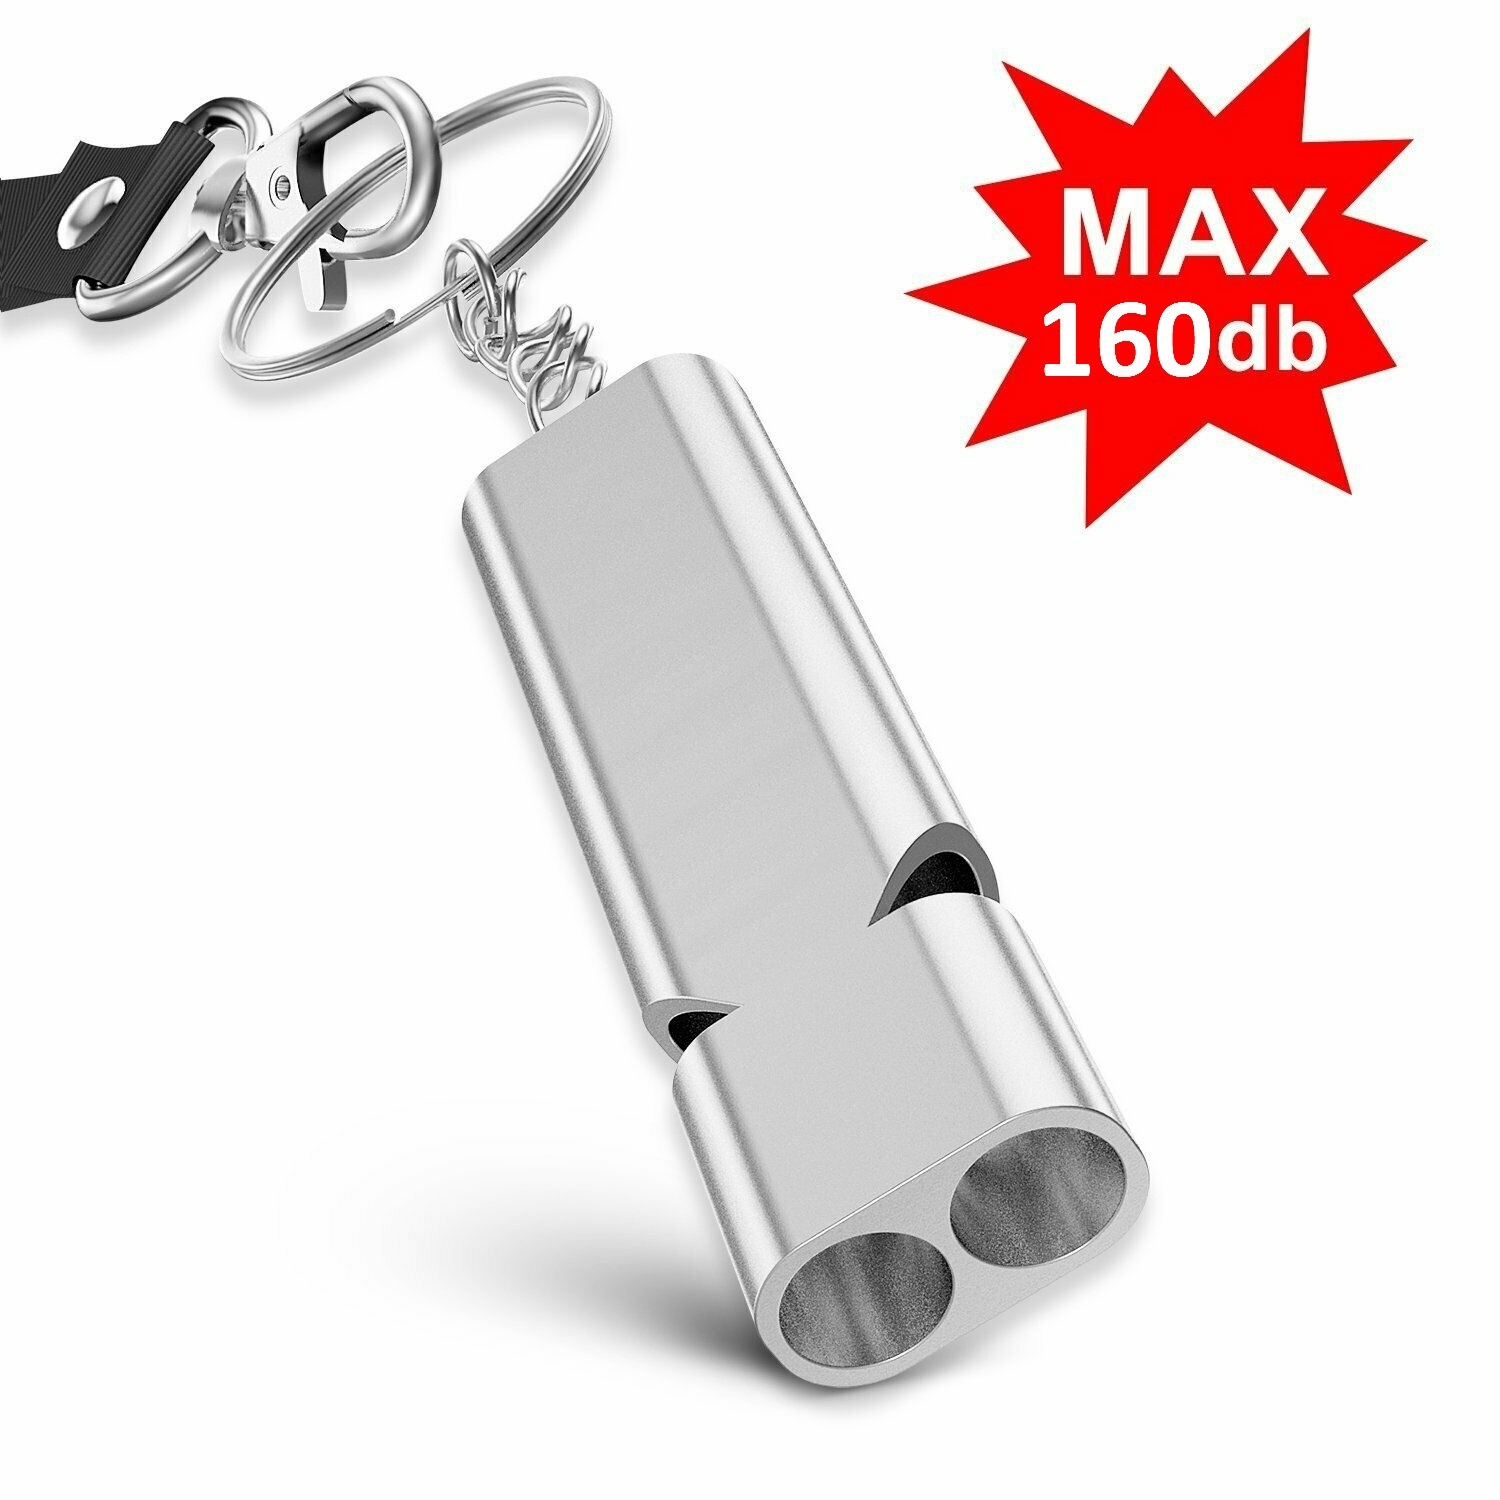 Shop for and Buy Whistle Keychain Aluminum Tube - Bulk Pack at .  Large selection and bulk discounts available.